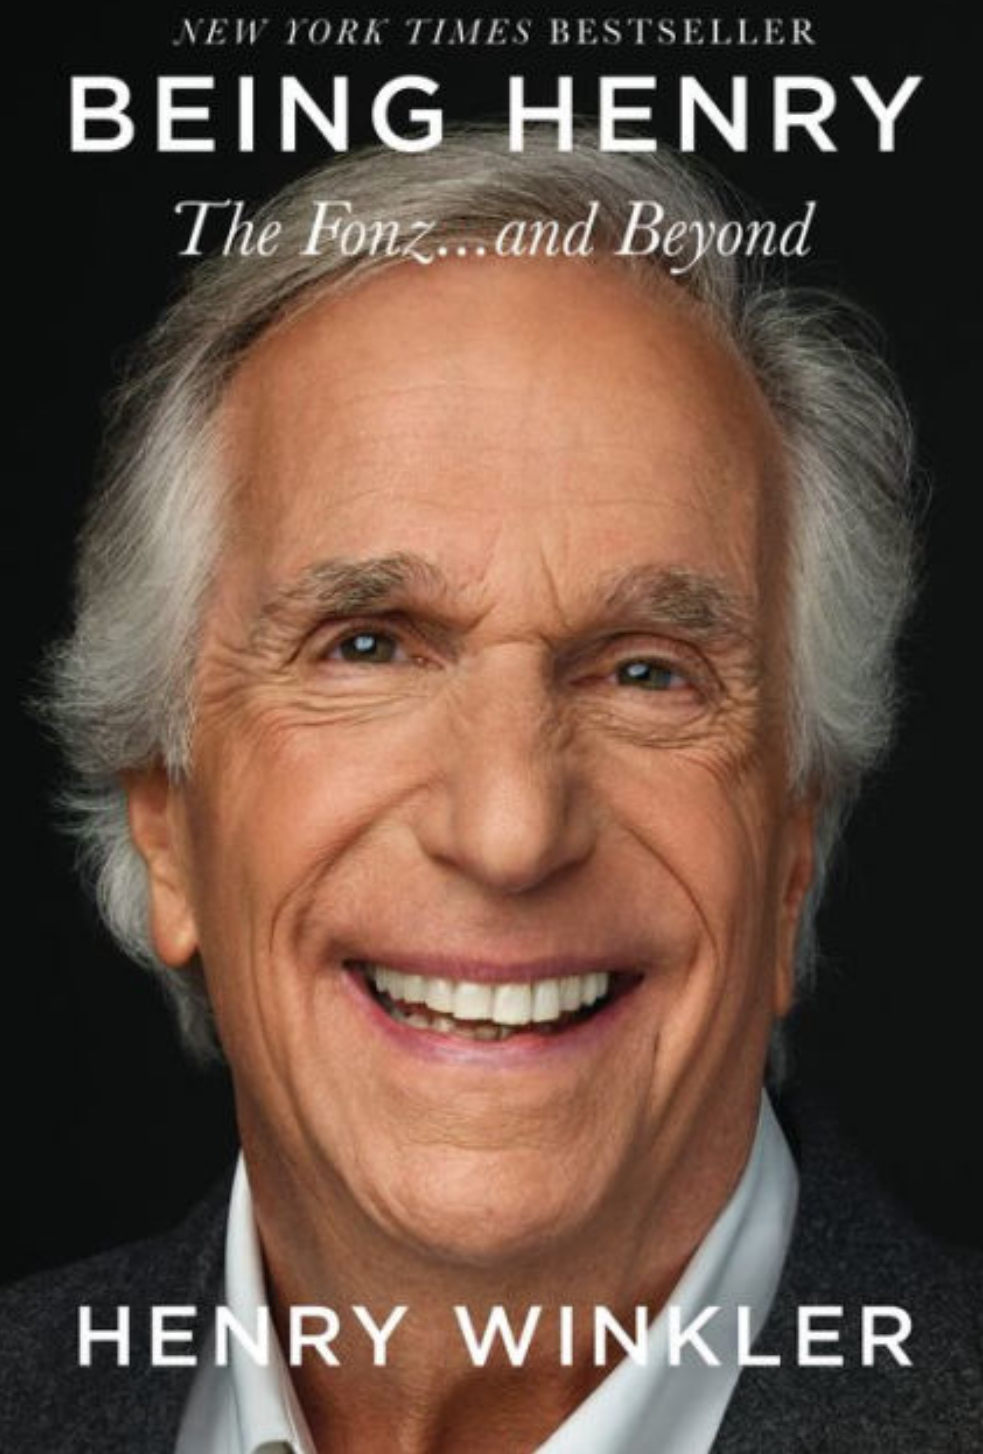 Book cover prominently showing recent photo of actor Henry Winkler smiling with grey hair and wearing an unbuttoned white dress shirt with a dark suit jacket. Behind Henry is a dark background and these words are on the book cover: New York Times Bestseller (centered at the top in white letters.) Below are these words in large white all capital letters: BEING HENRY Below in white italics are these words: The Fonz…and Beyond Centered at the bottom in slightly smaller white all capital letters is the name, HENRY WINKLER